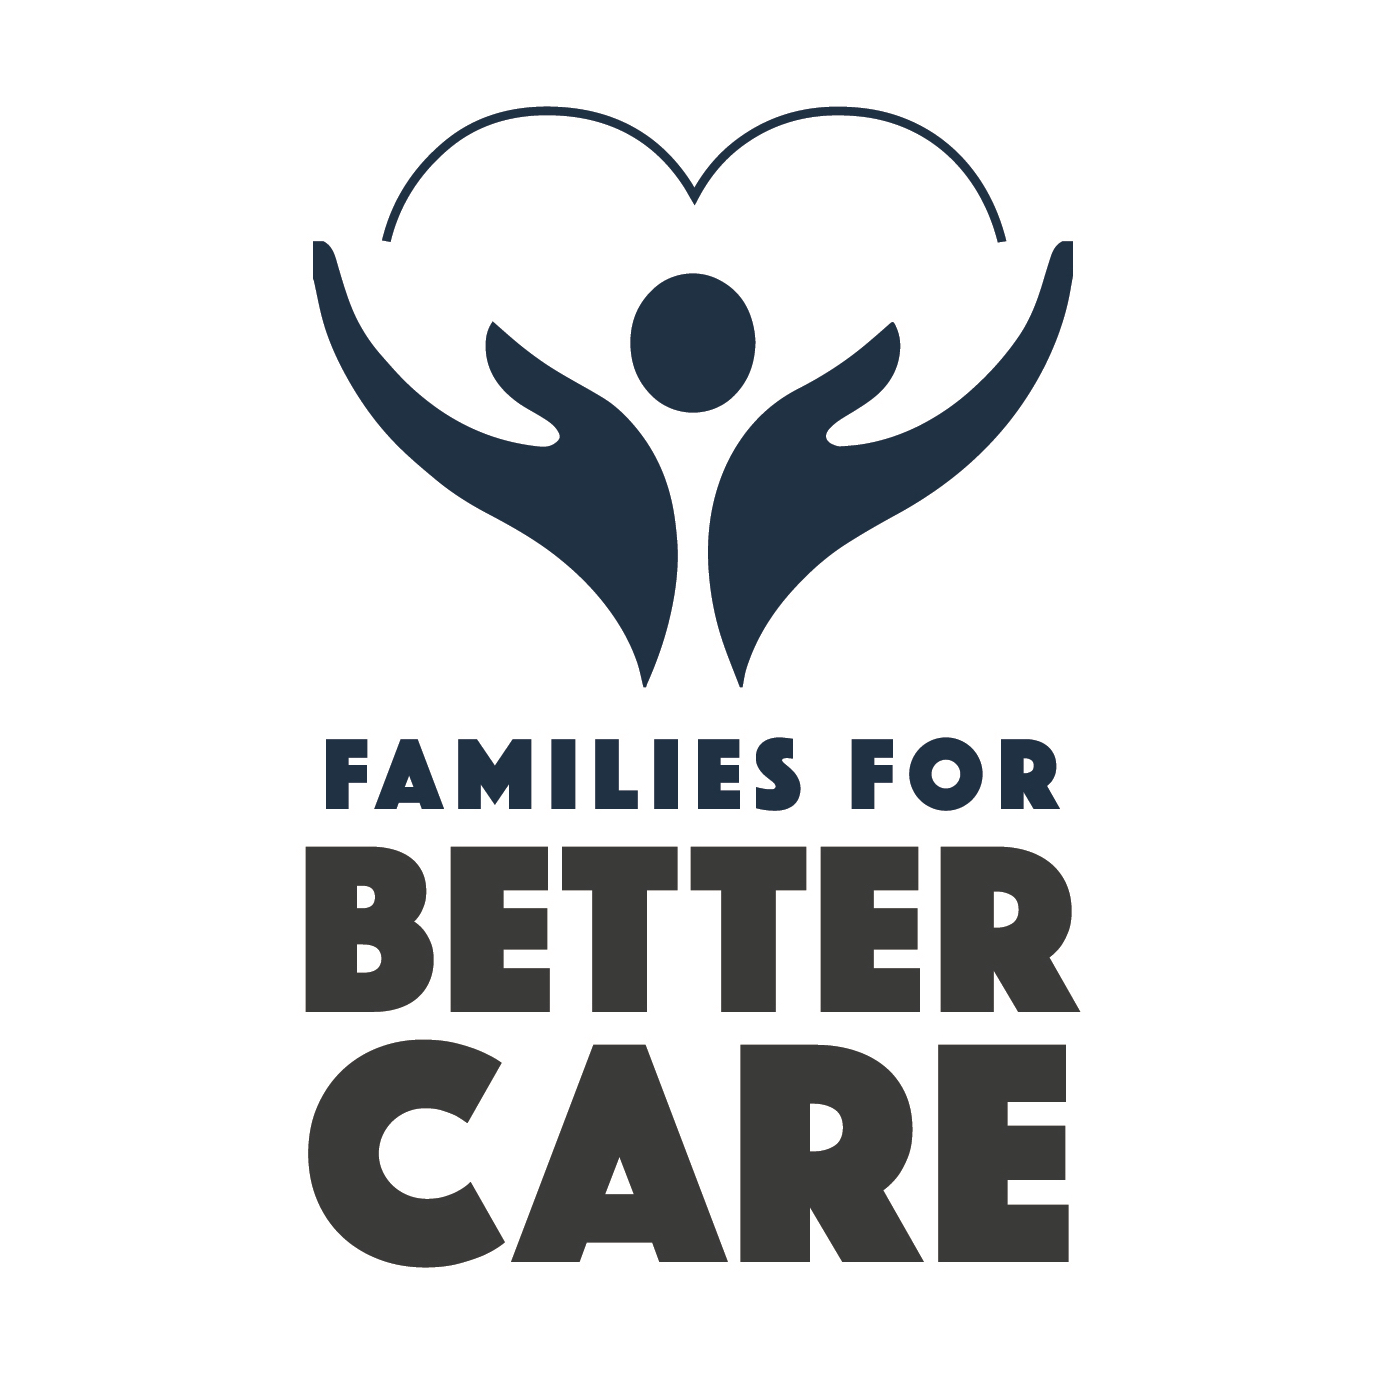 Families for Better Care Brian Lee Stimulus Payment Image